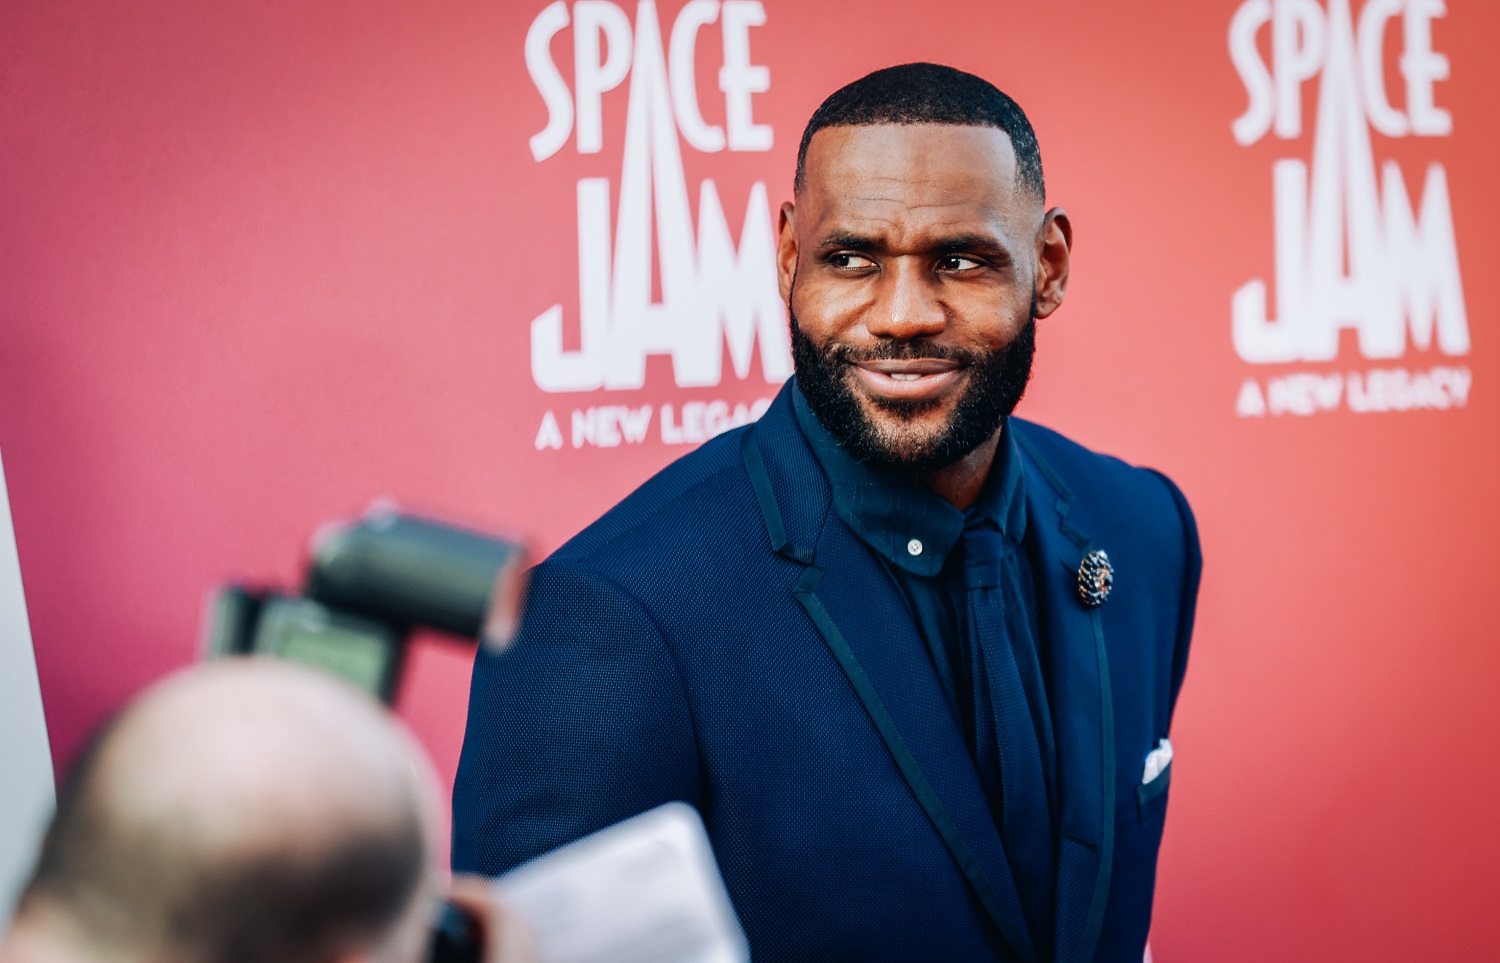 Los Angeles Lakers star LeBron James attends the premiere of Warner Bros 'Space Jam: A New Legacy' at Regal LA Live on July 12, 2021, in Los Angeles. | Matt Winkelmeyer/WireImage/Getty Images